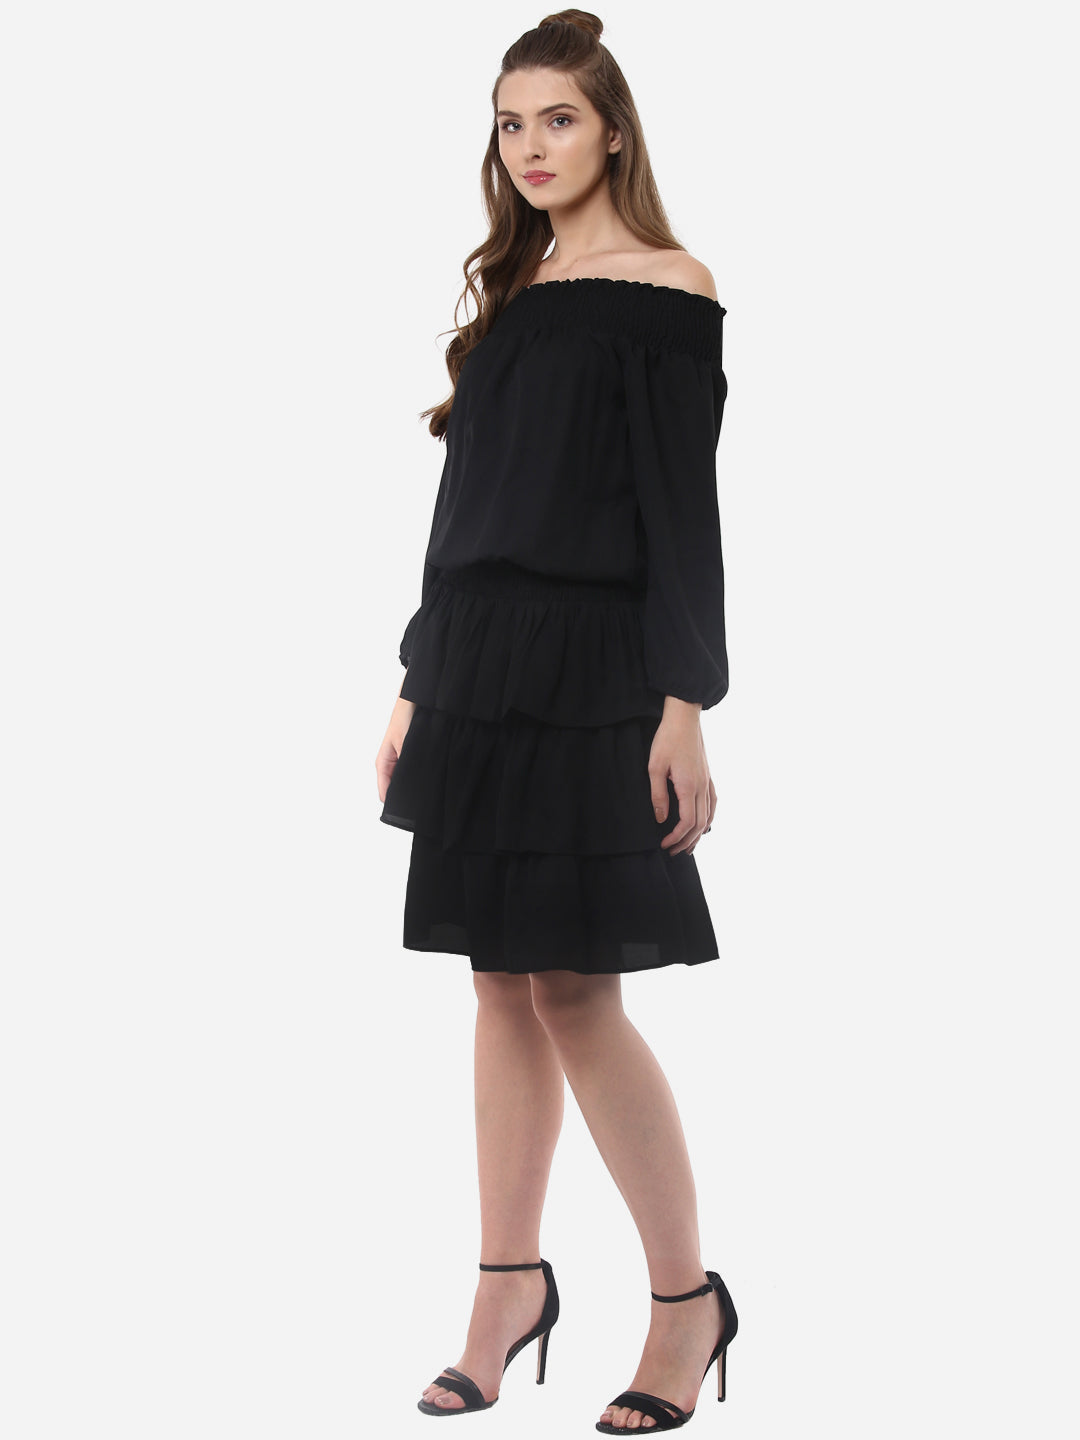 Women's Black Polyester Dress with Multiple Tiers